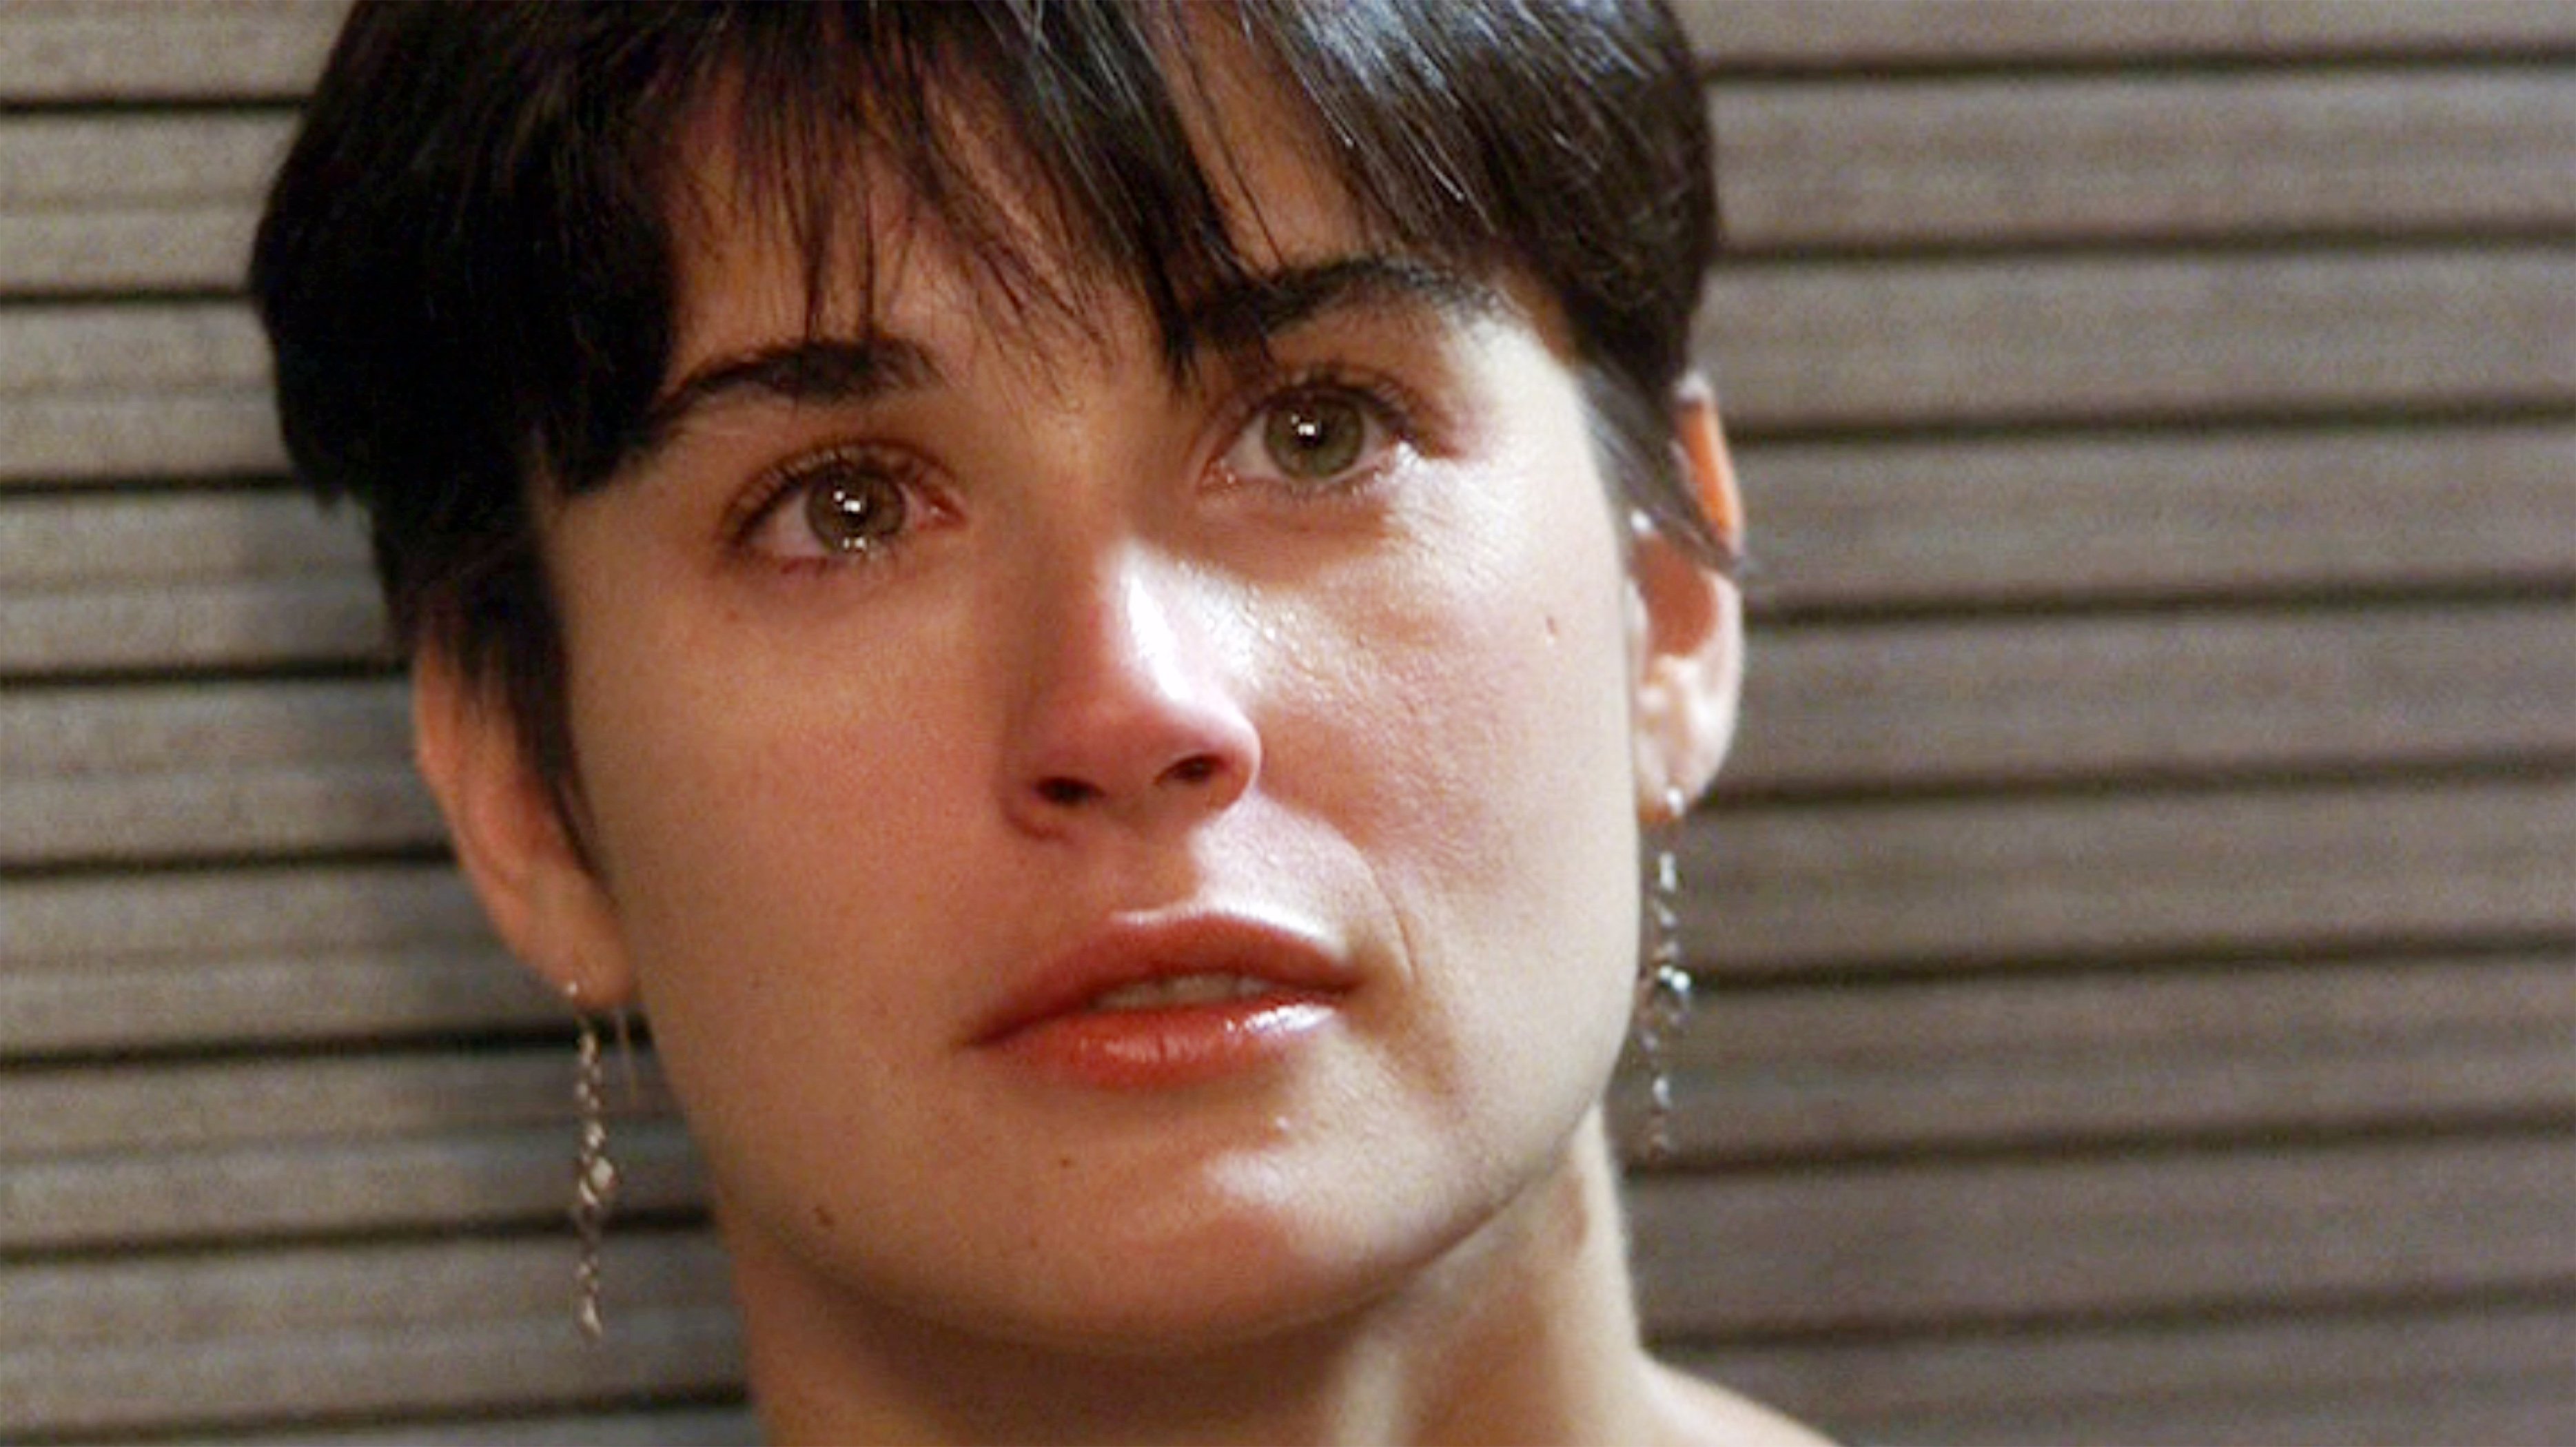 Demi Moore as Molly Jensen in the movie, "Ghost" on July 13, 1990. / Source: Getty Images